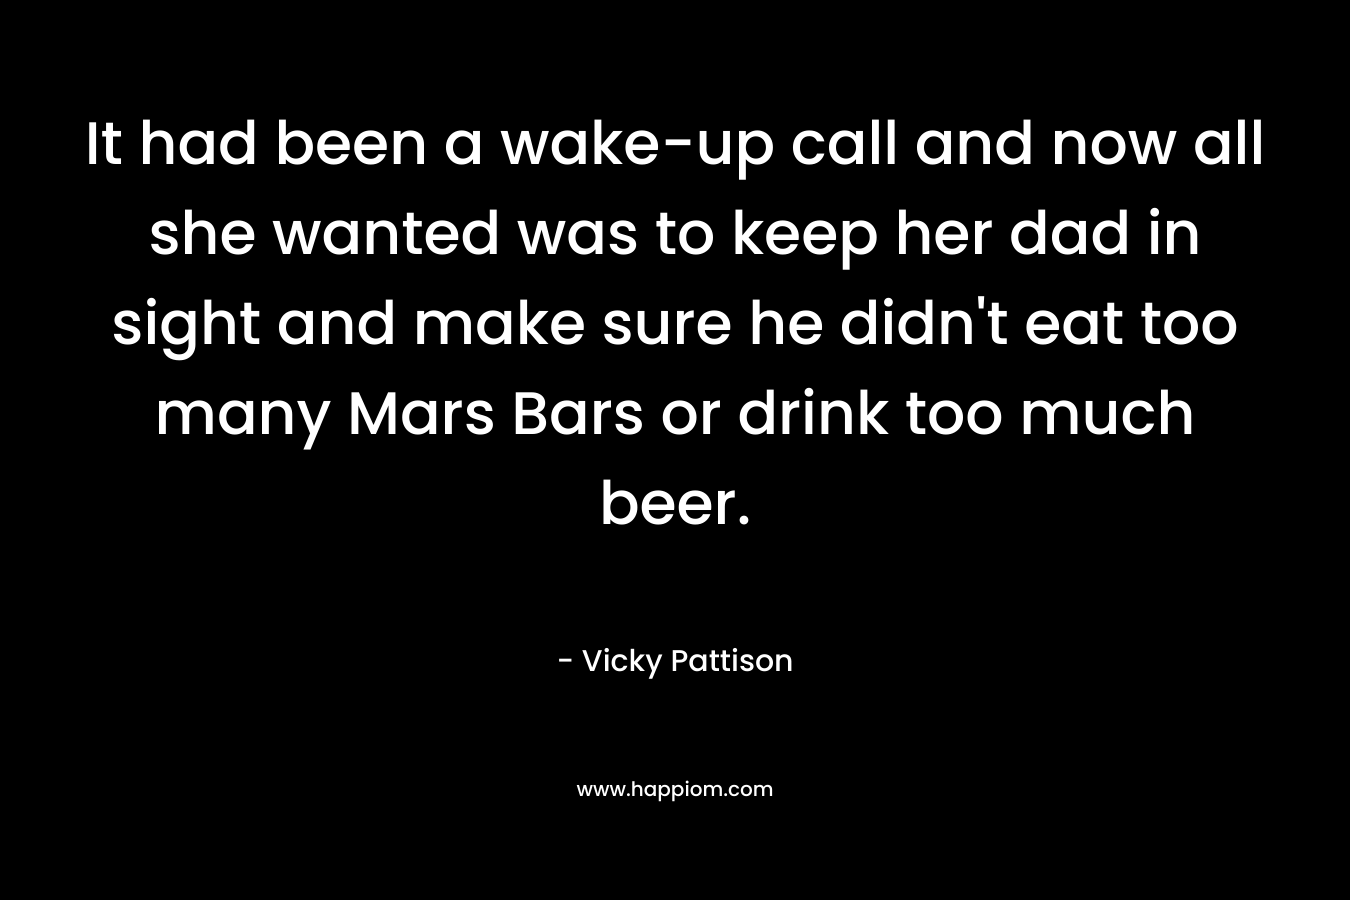 It had been a wake-up call and now all she wanted was to keep her dad in sight and make sure he didn't eat too many Mars Bars or drink too much beer.